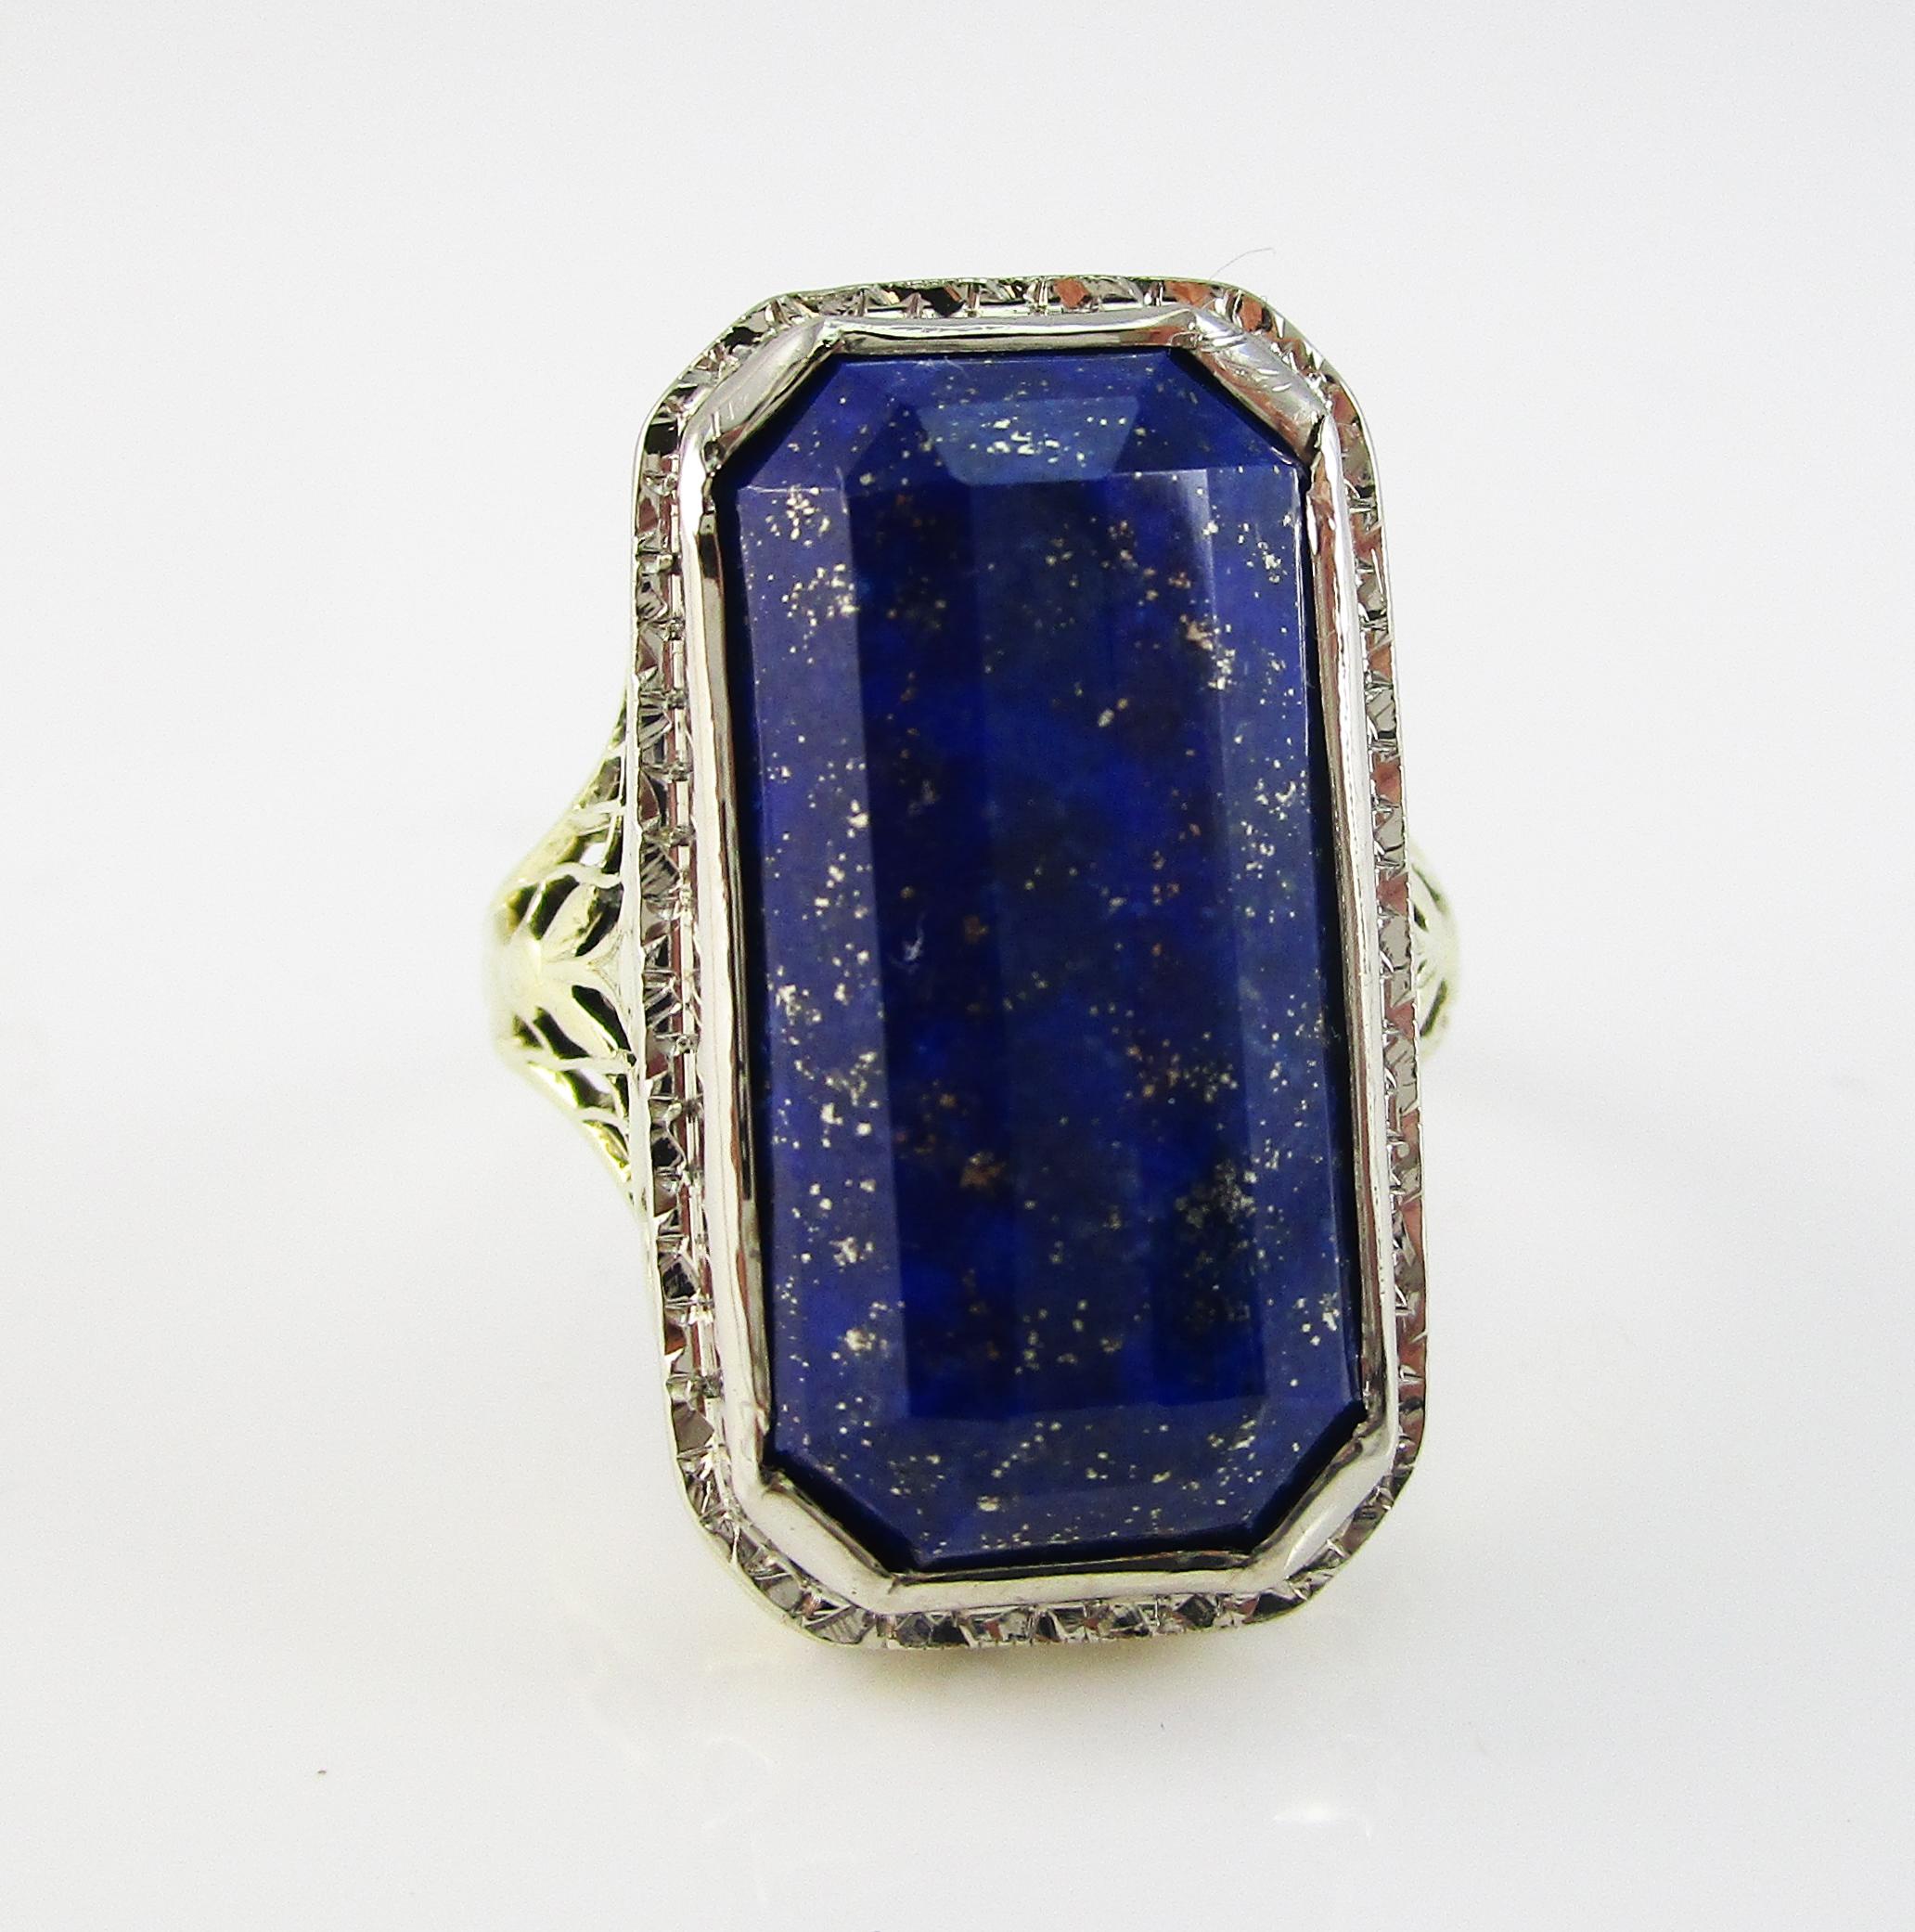 This is a remarkable Edwardian ring in 14k white and green gold with stunning filigree details and a gorgeous faceted natural blue lapis center stone! The under gallery and shank of the ring are in green gold and boast incredible filigree work. The